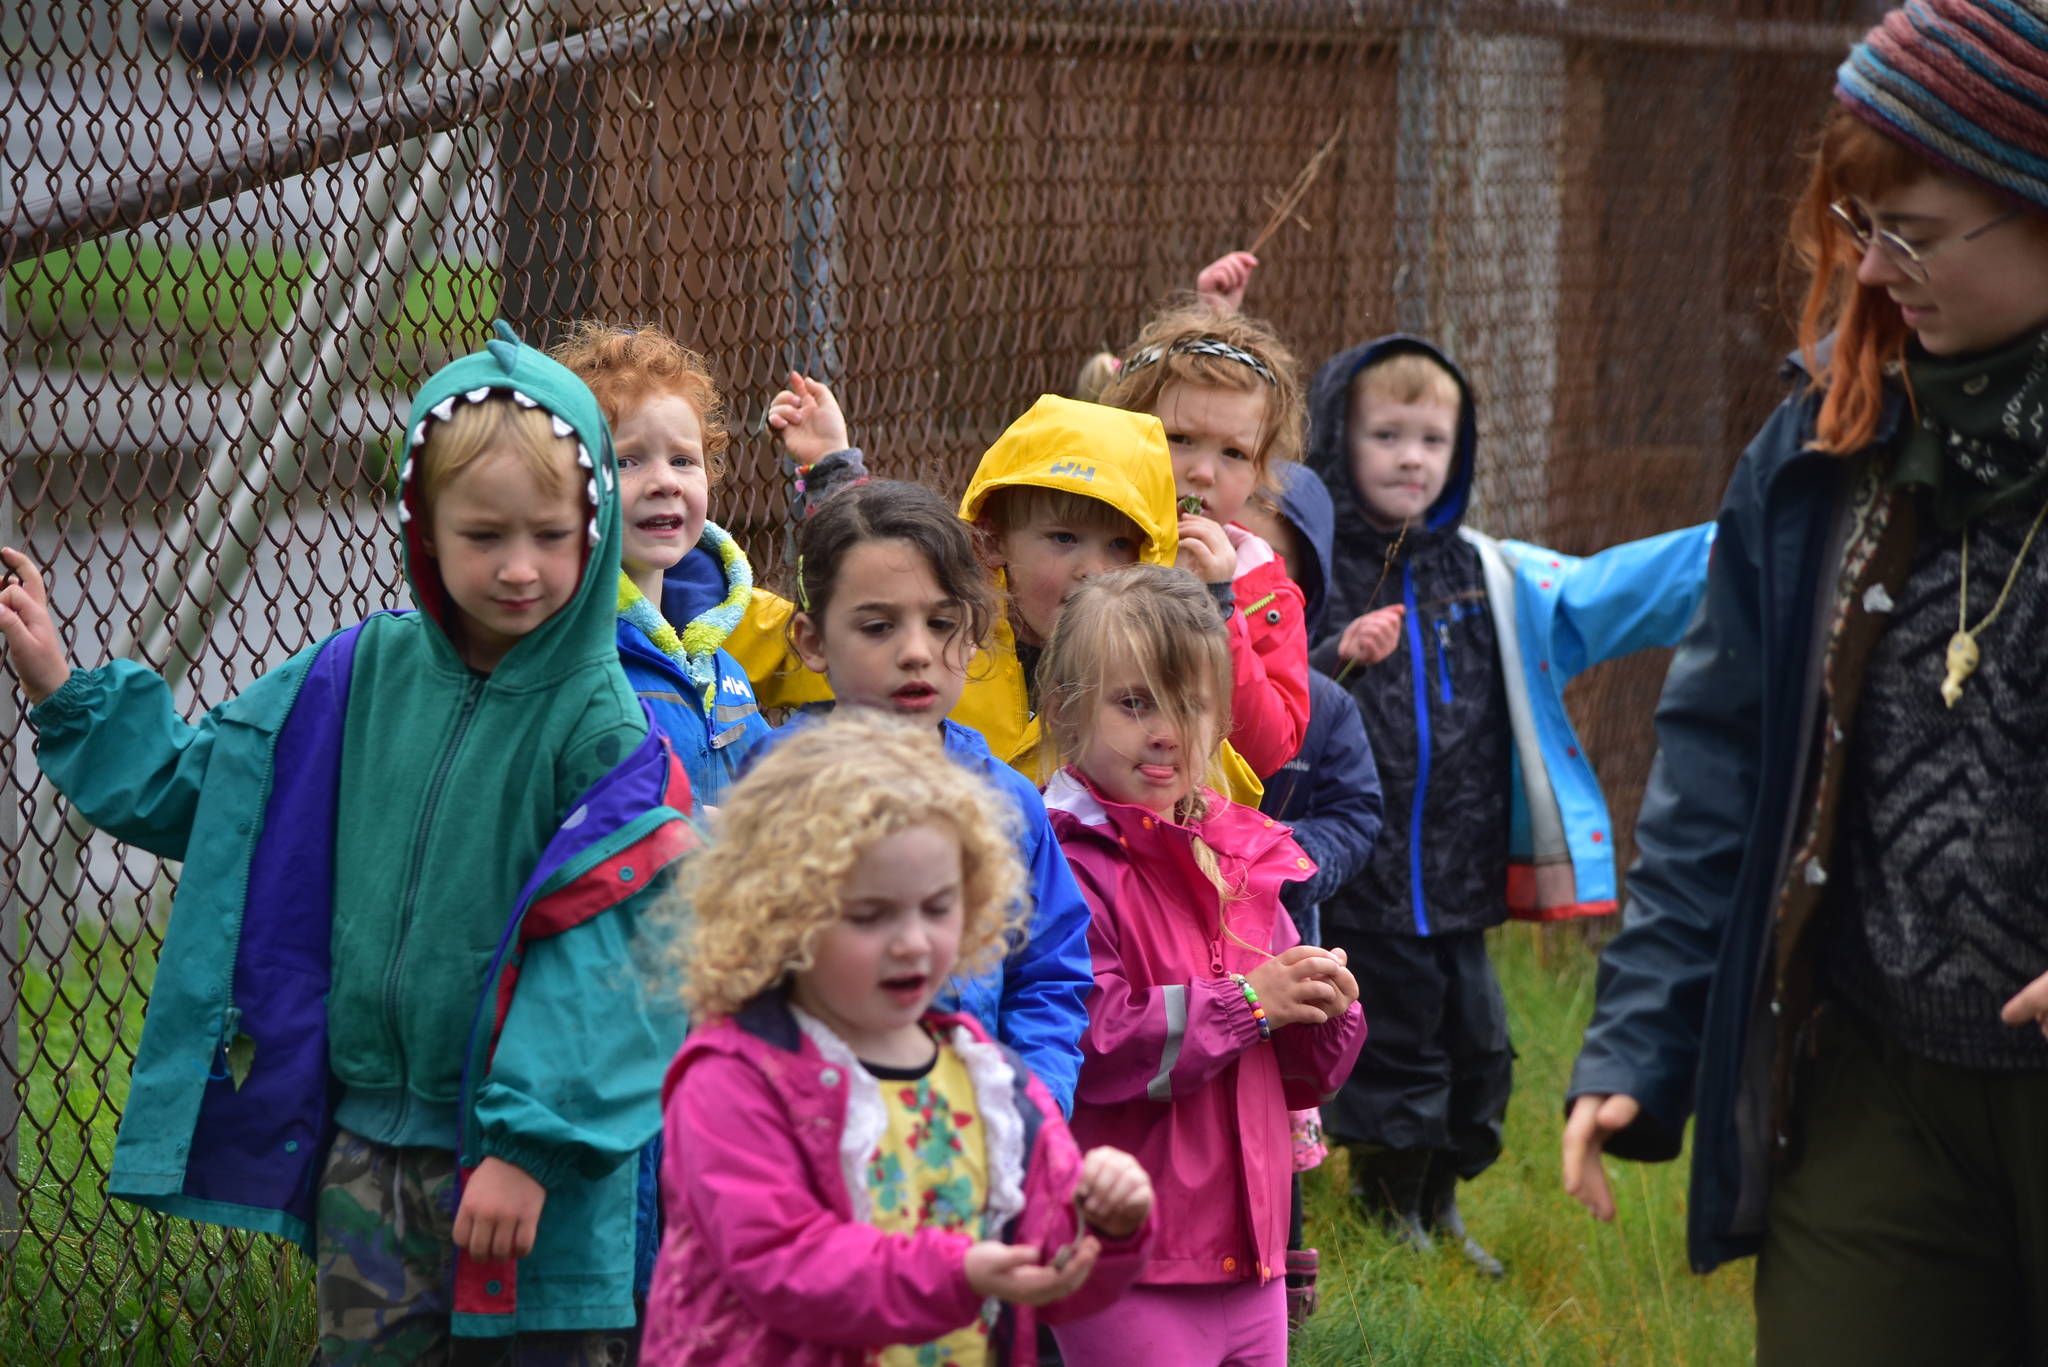 Students at the Juneau Montessori School in Douglas on Tuesday, Aug. 11, 2020. Montessori is a private pre-school and kindergarten which has received a large number of parents looking for child care following the Juneau School District’s announcement the 2020 school year would begin mostly online, according to executive director Laura Talpey. (Peter Segall / Juneau Empire)